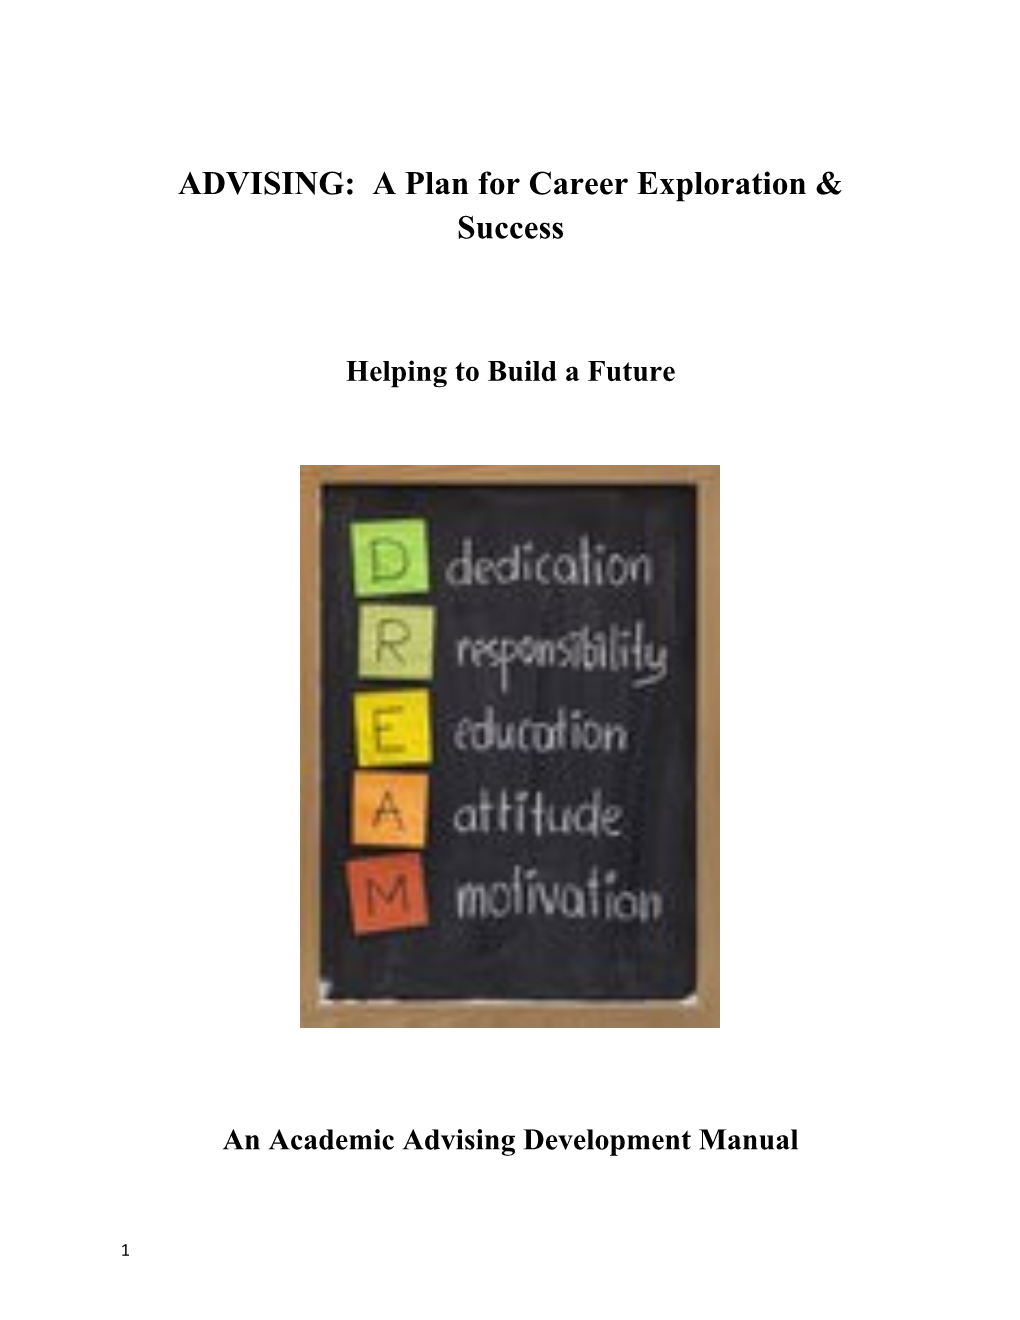 ADVISING: a Plan for Career Exploration & Success